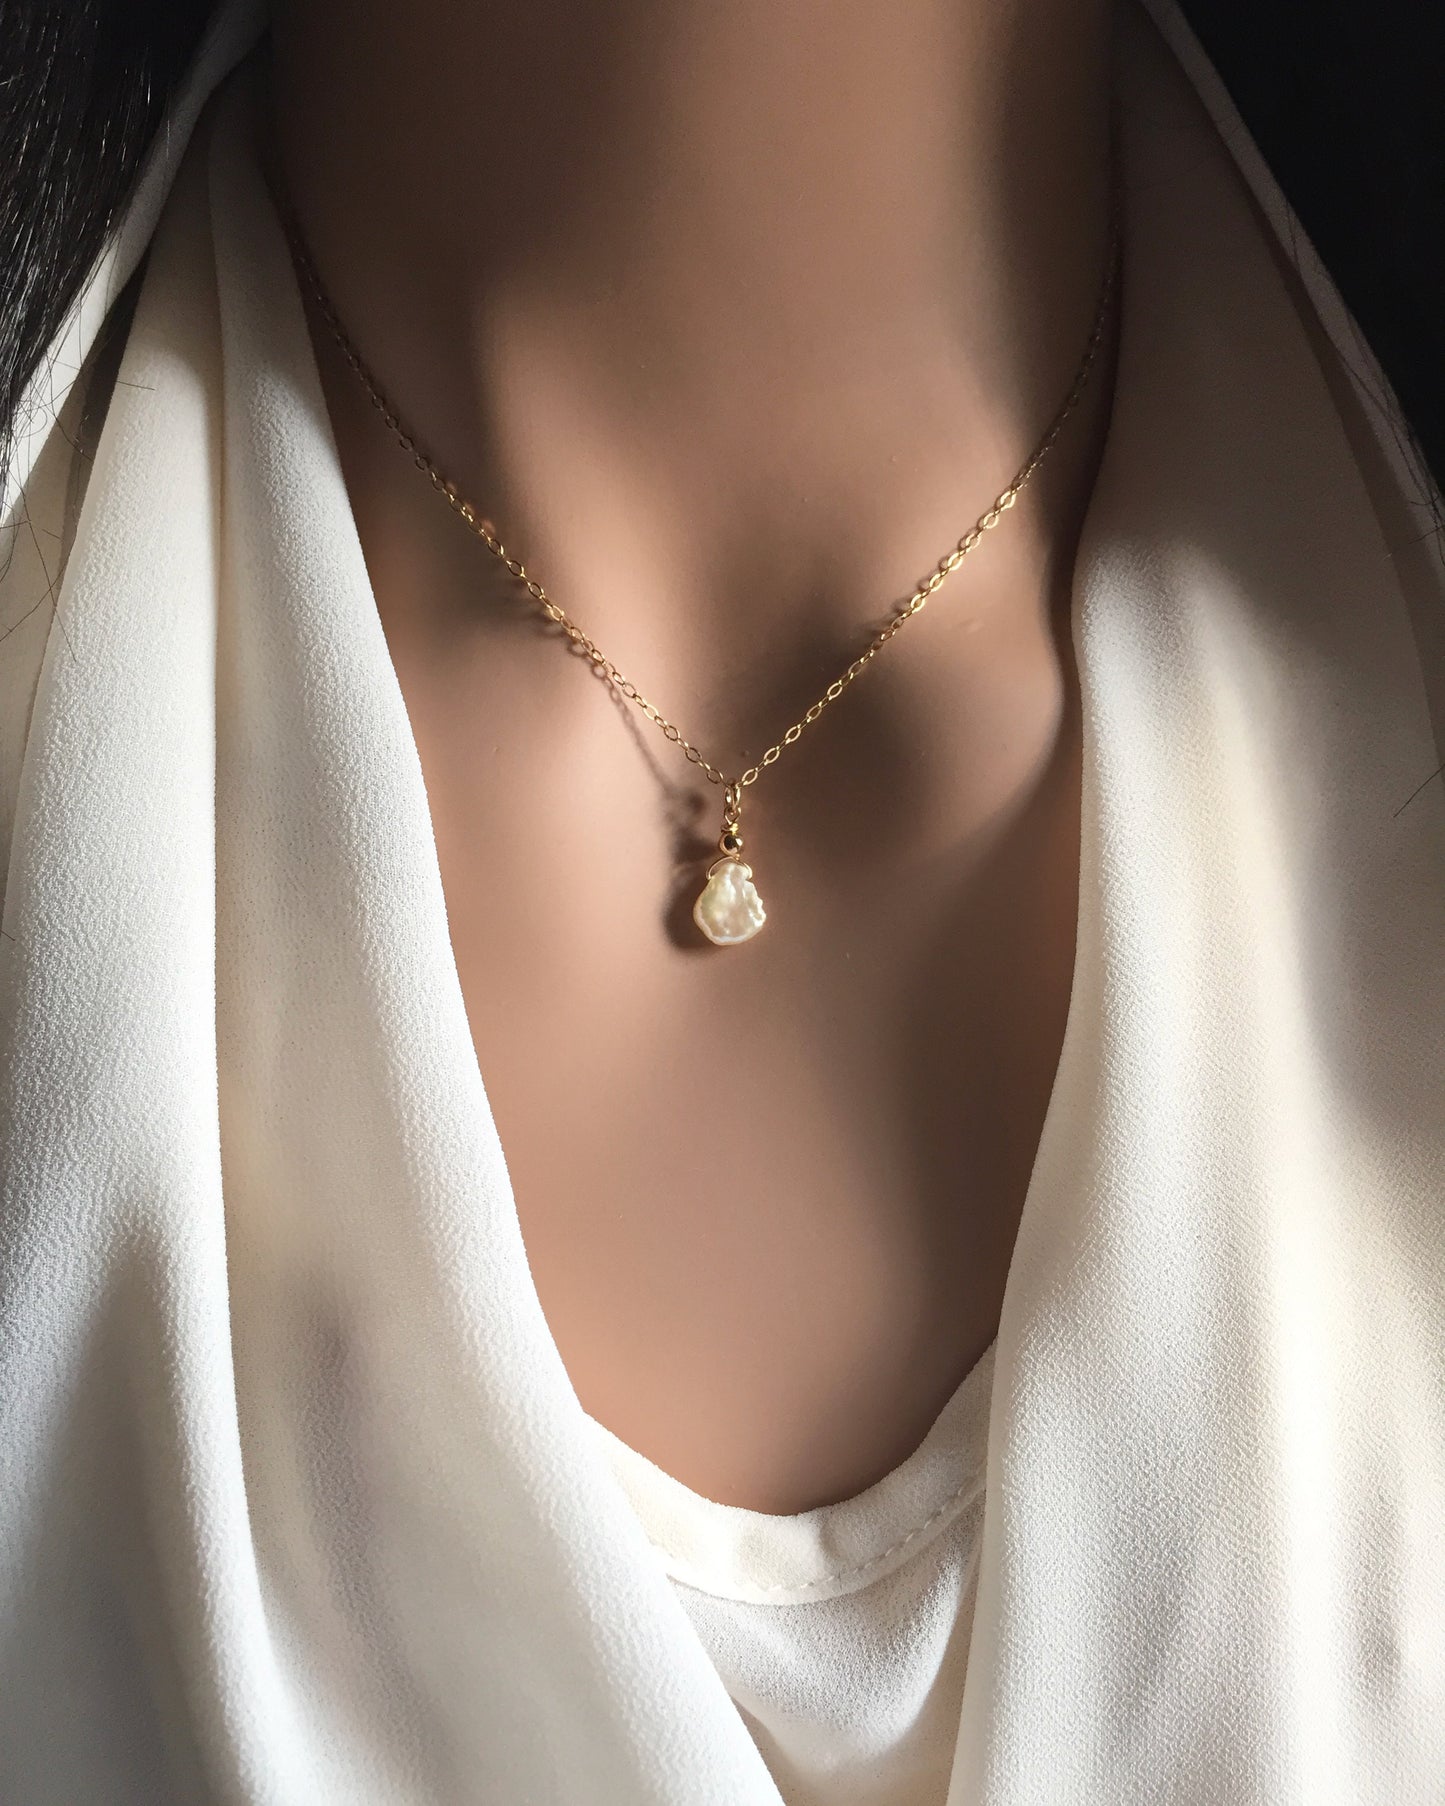 Organic Pearl Drop Necklace | Small Dainty Necklace | IB Jewelry